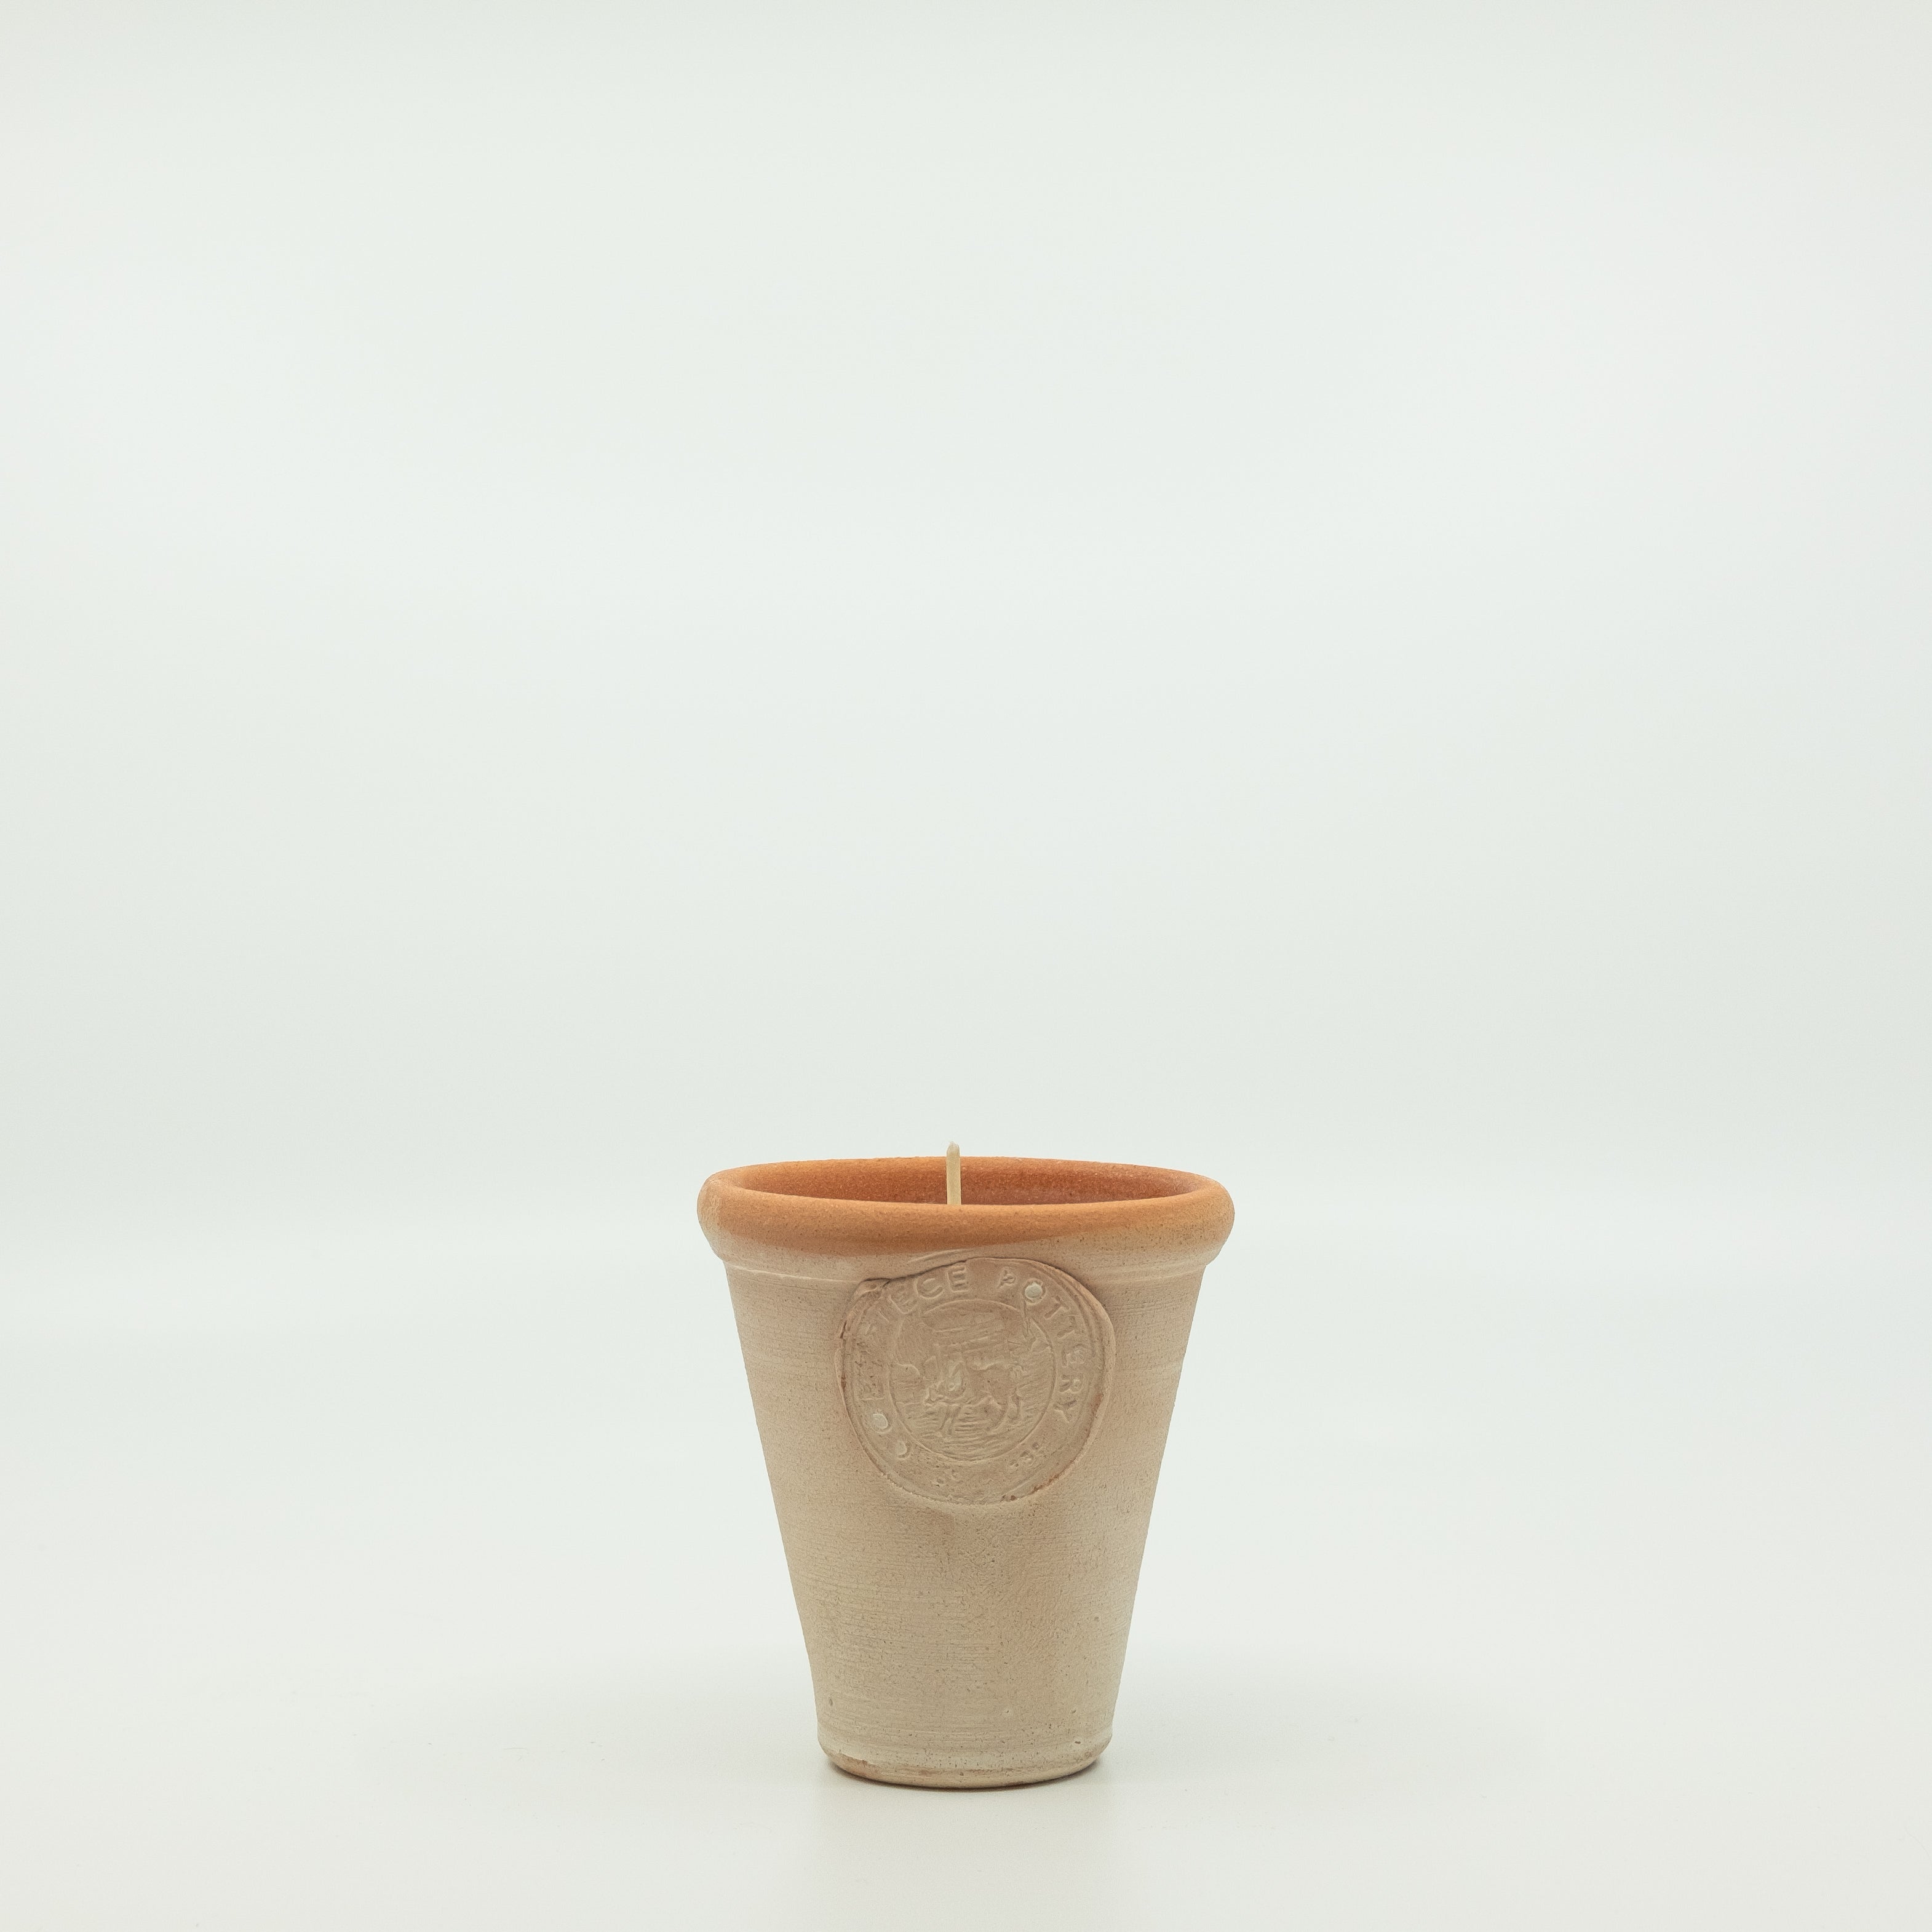 Coldpiece Pottery Flowerpot Candle